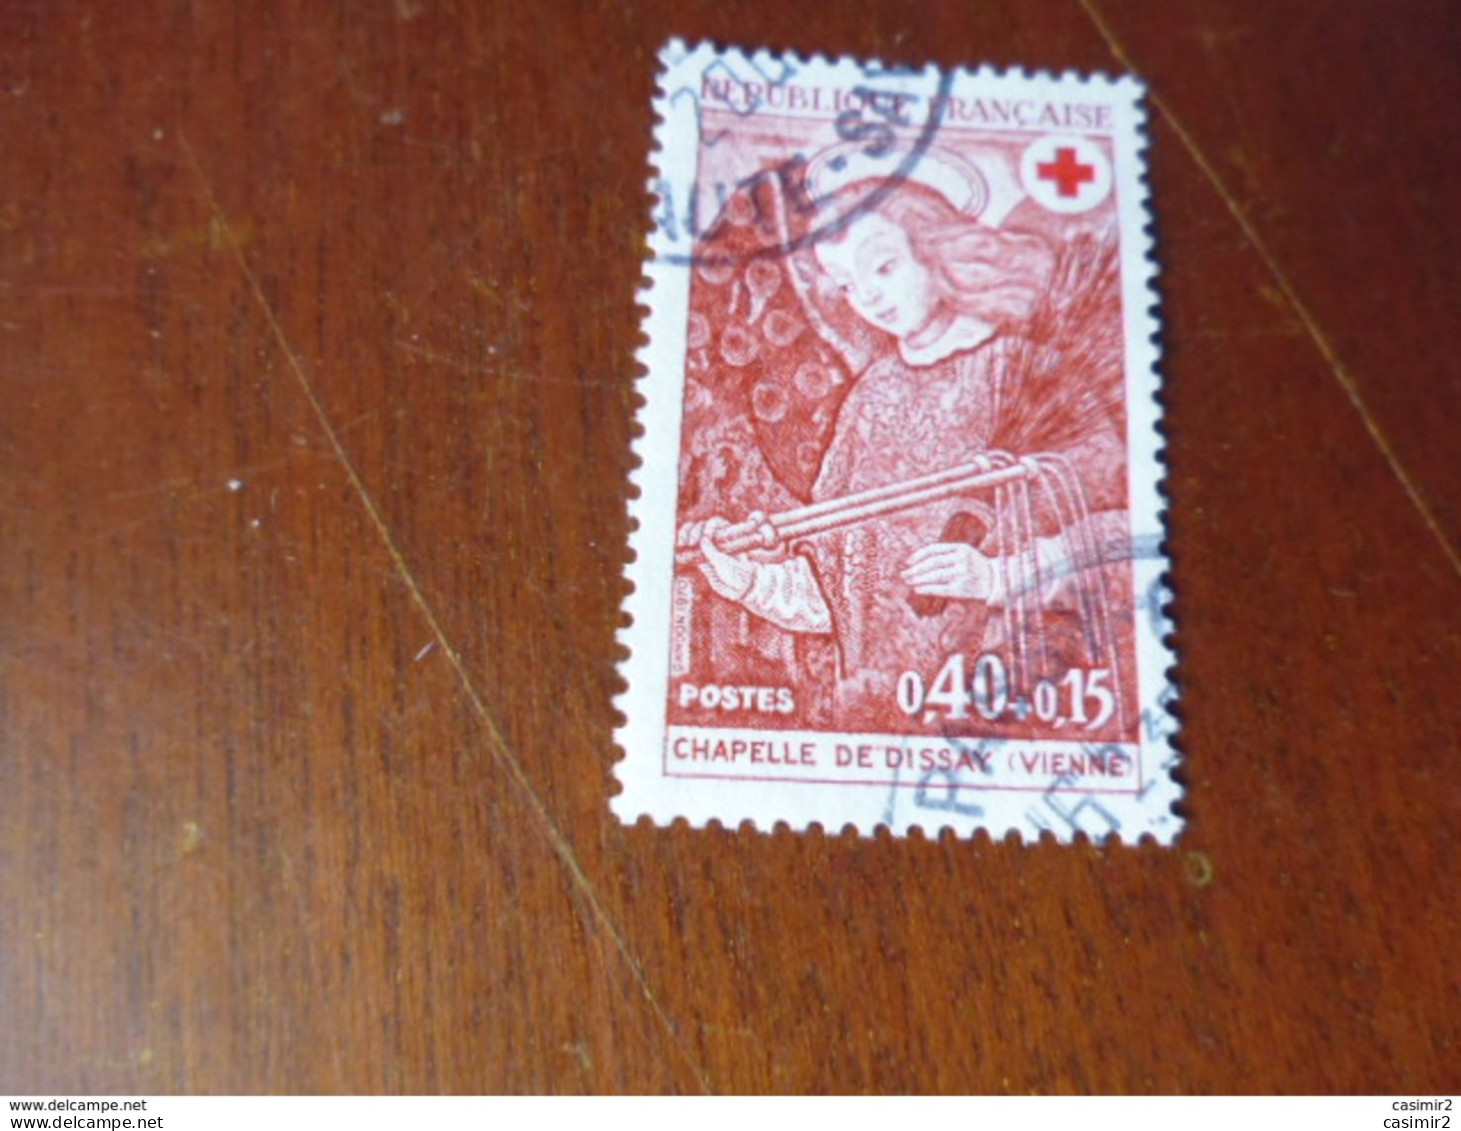 TIMBRE OBLITERE   YVERT N° 1662 - Used Stamps